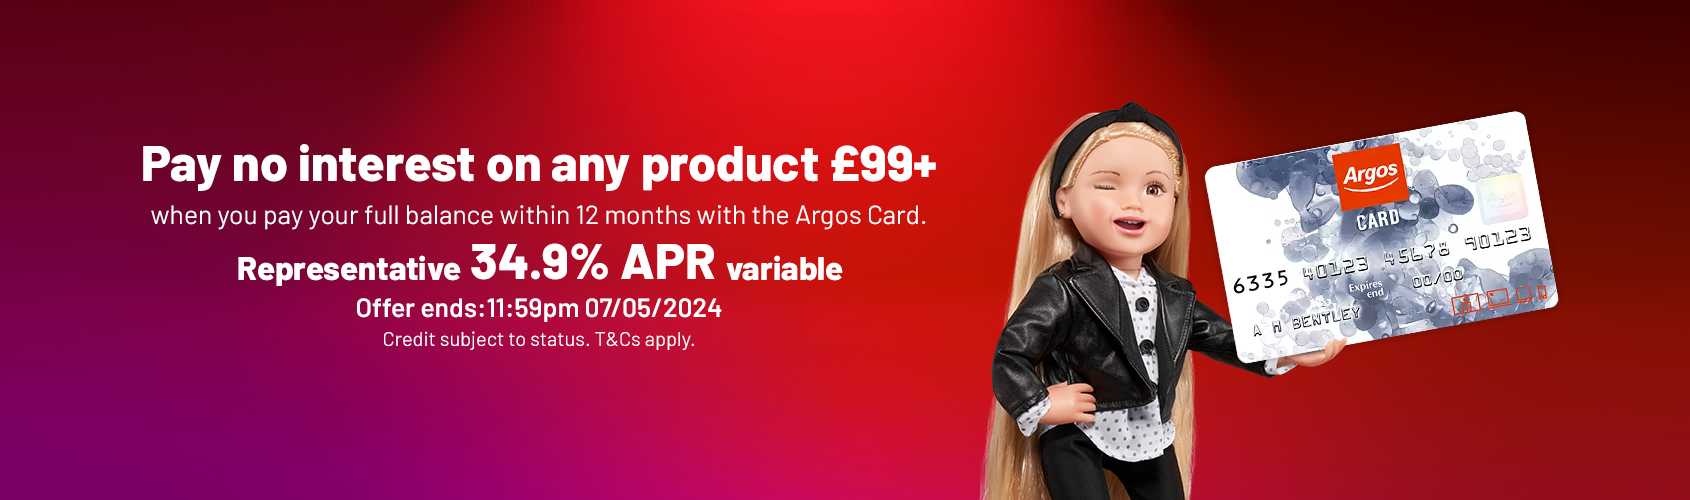  Pay no interest on any product £99+. when you pay your full balance with 12 months with the Argos Card.